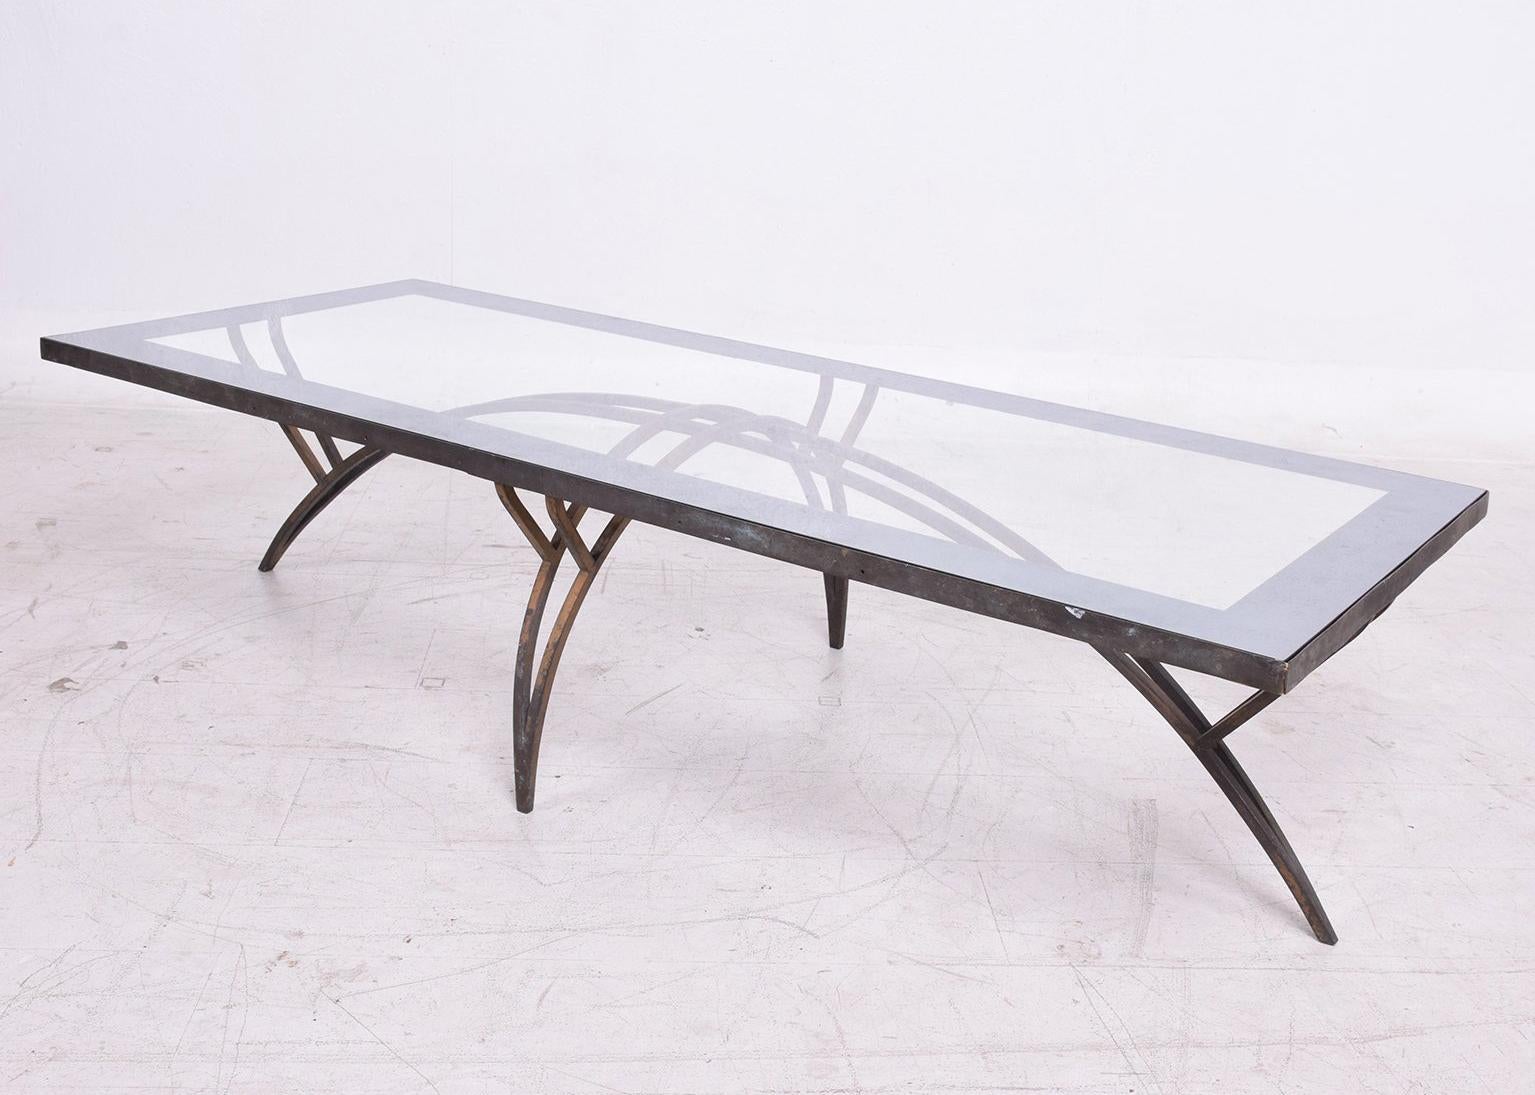 For your consideration a rectangular coffee table with elliptical sculptural legs. 
The table ins constructed with bronze legs. The rectangular frame is made of steel with a bronze face plate and a glass top with silver band. 

The bronze has the